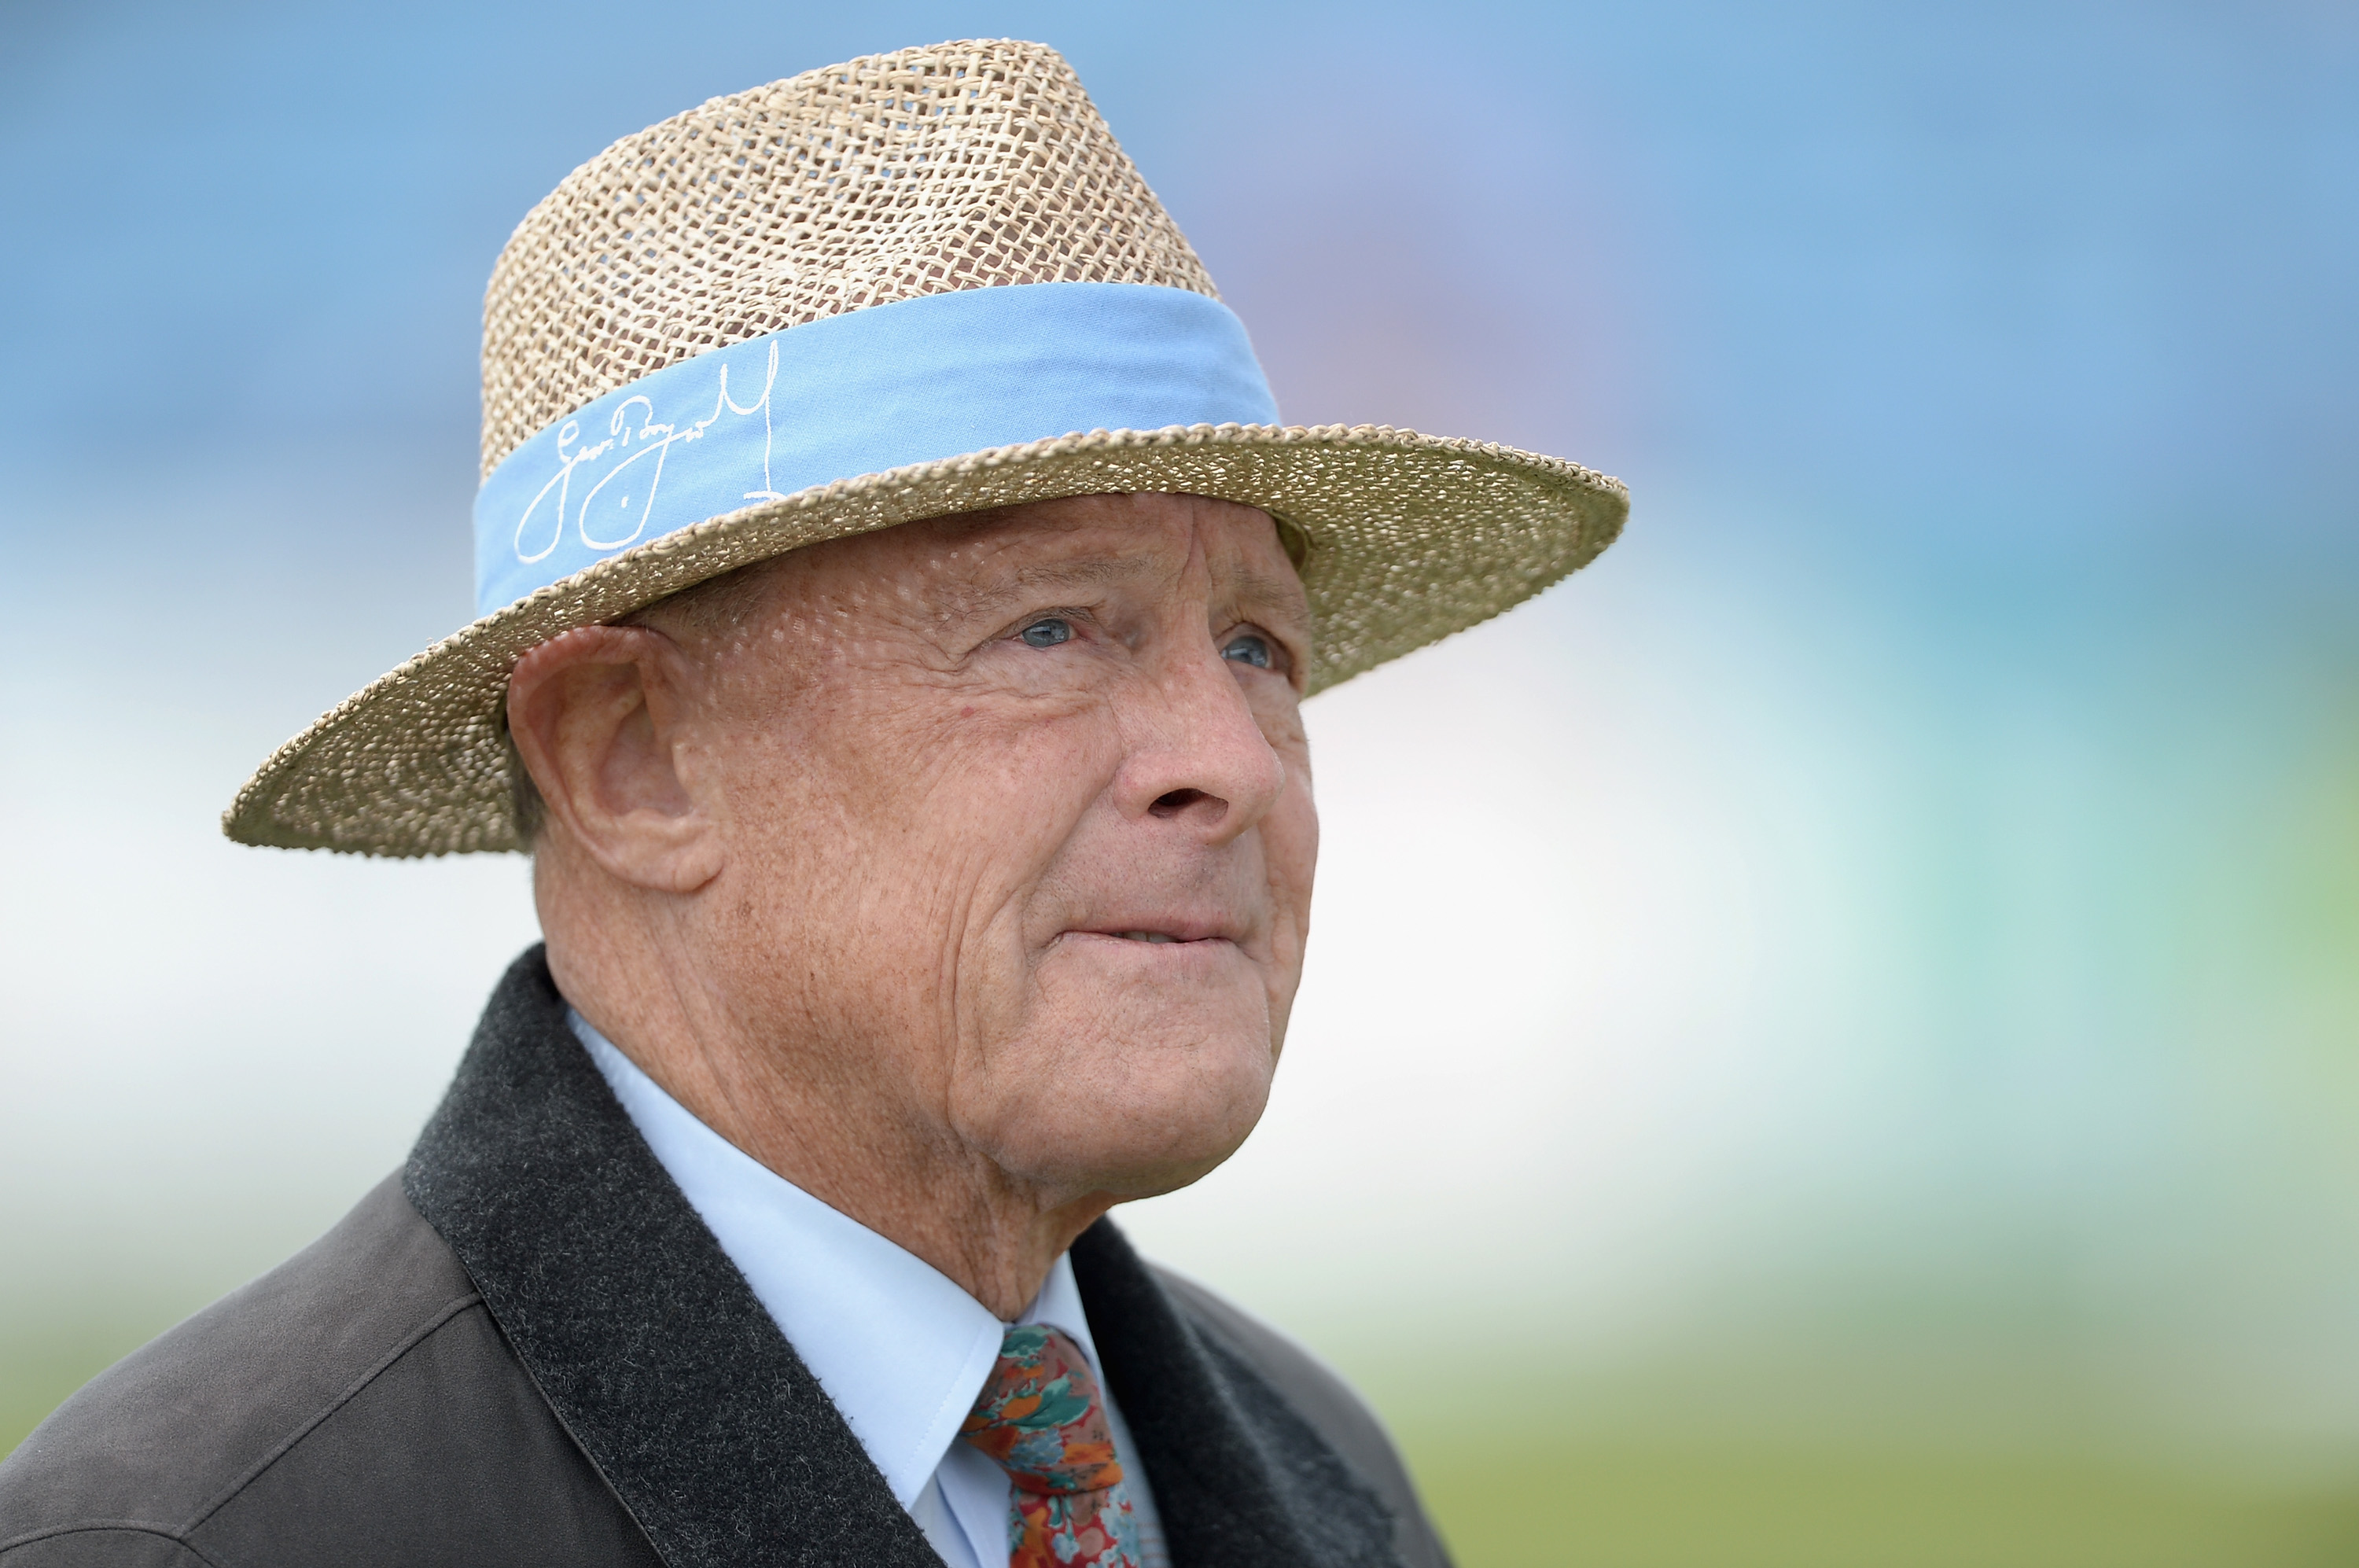 ENG vs IND | ‘If you are stupid, you don’t deserve to win’ - Geoffrey Boycott slams England after Lord’s defeat